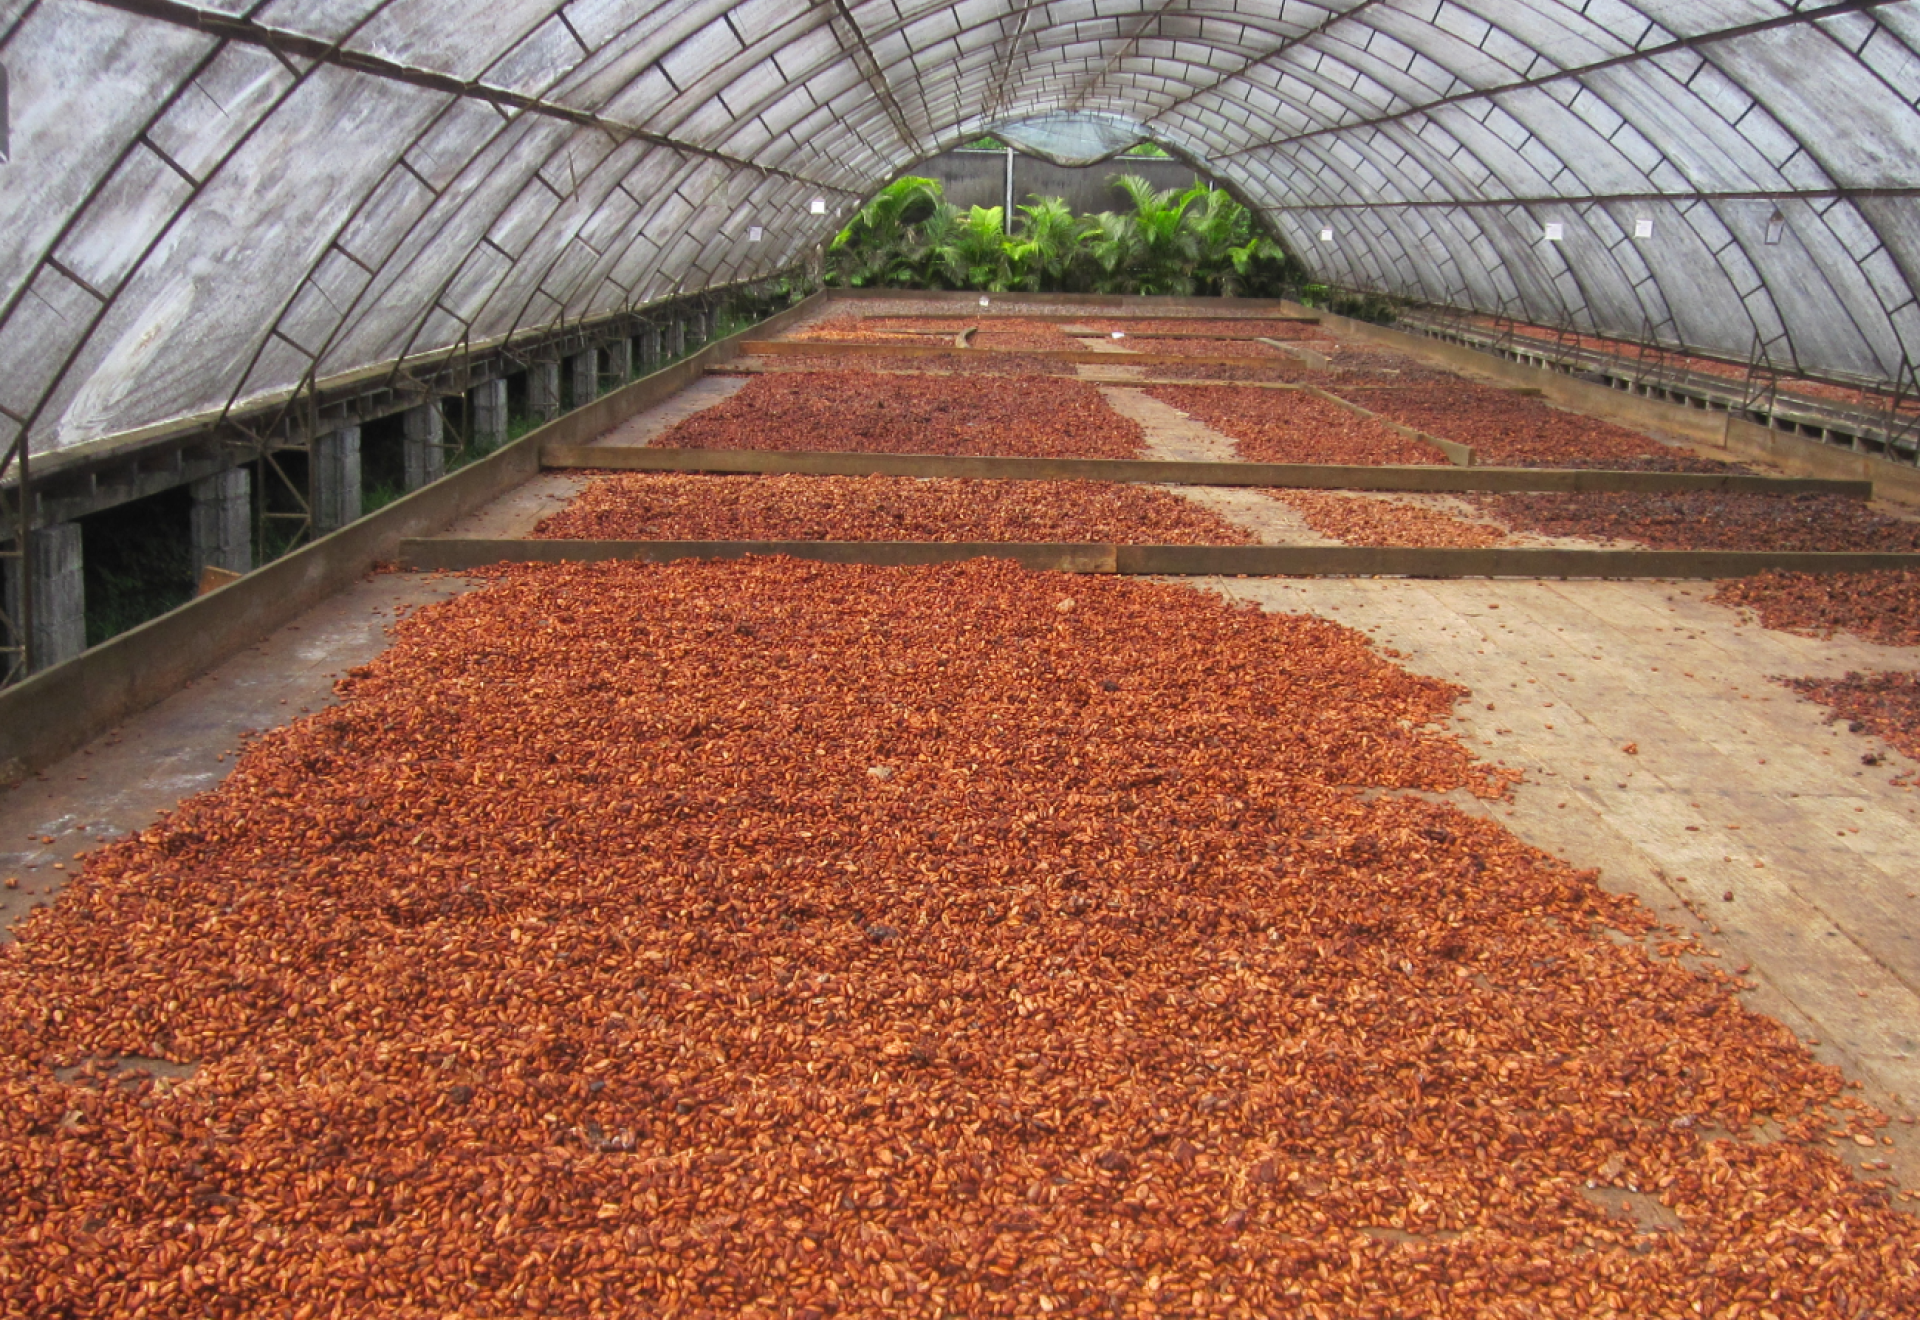 Beans on large mat in green house